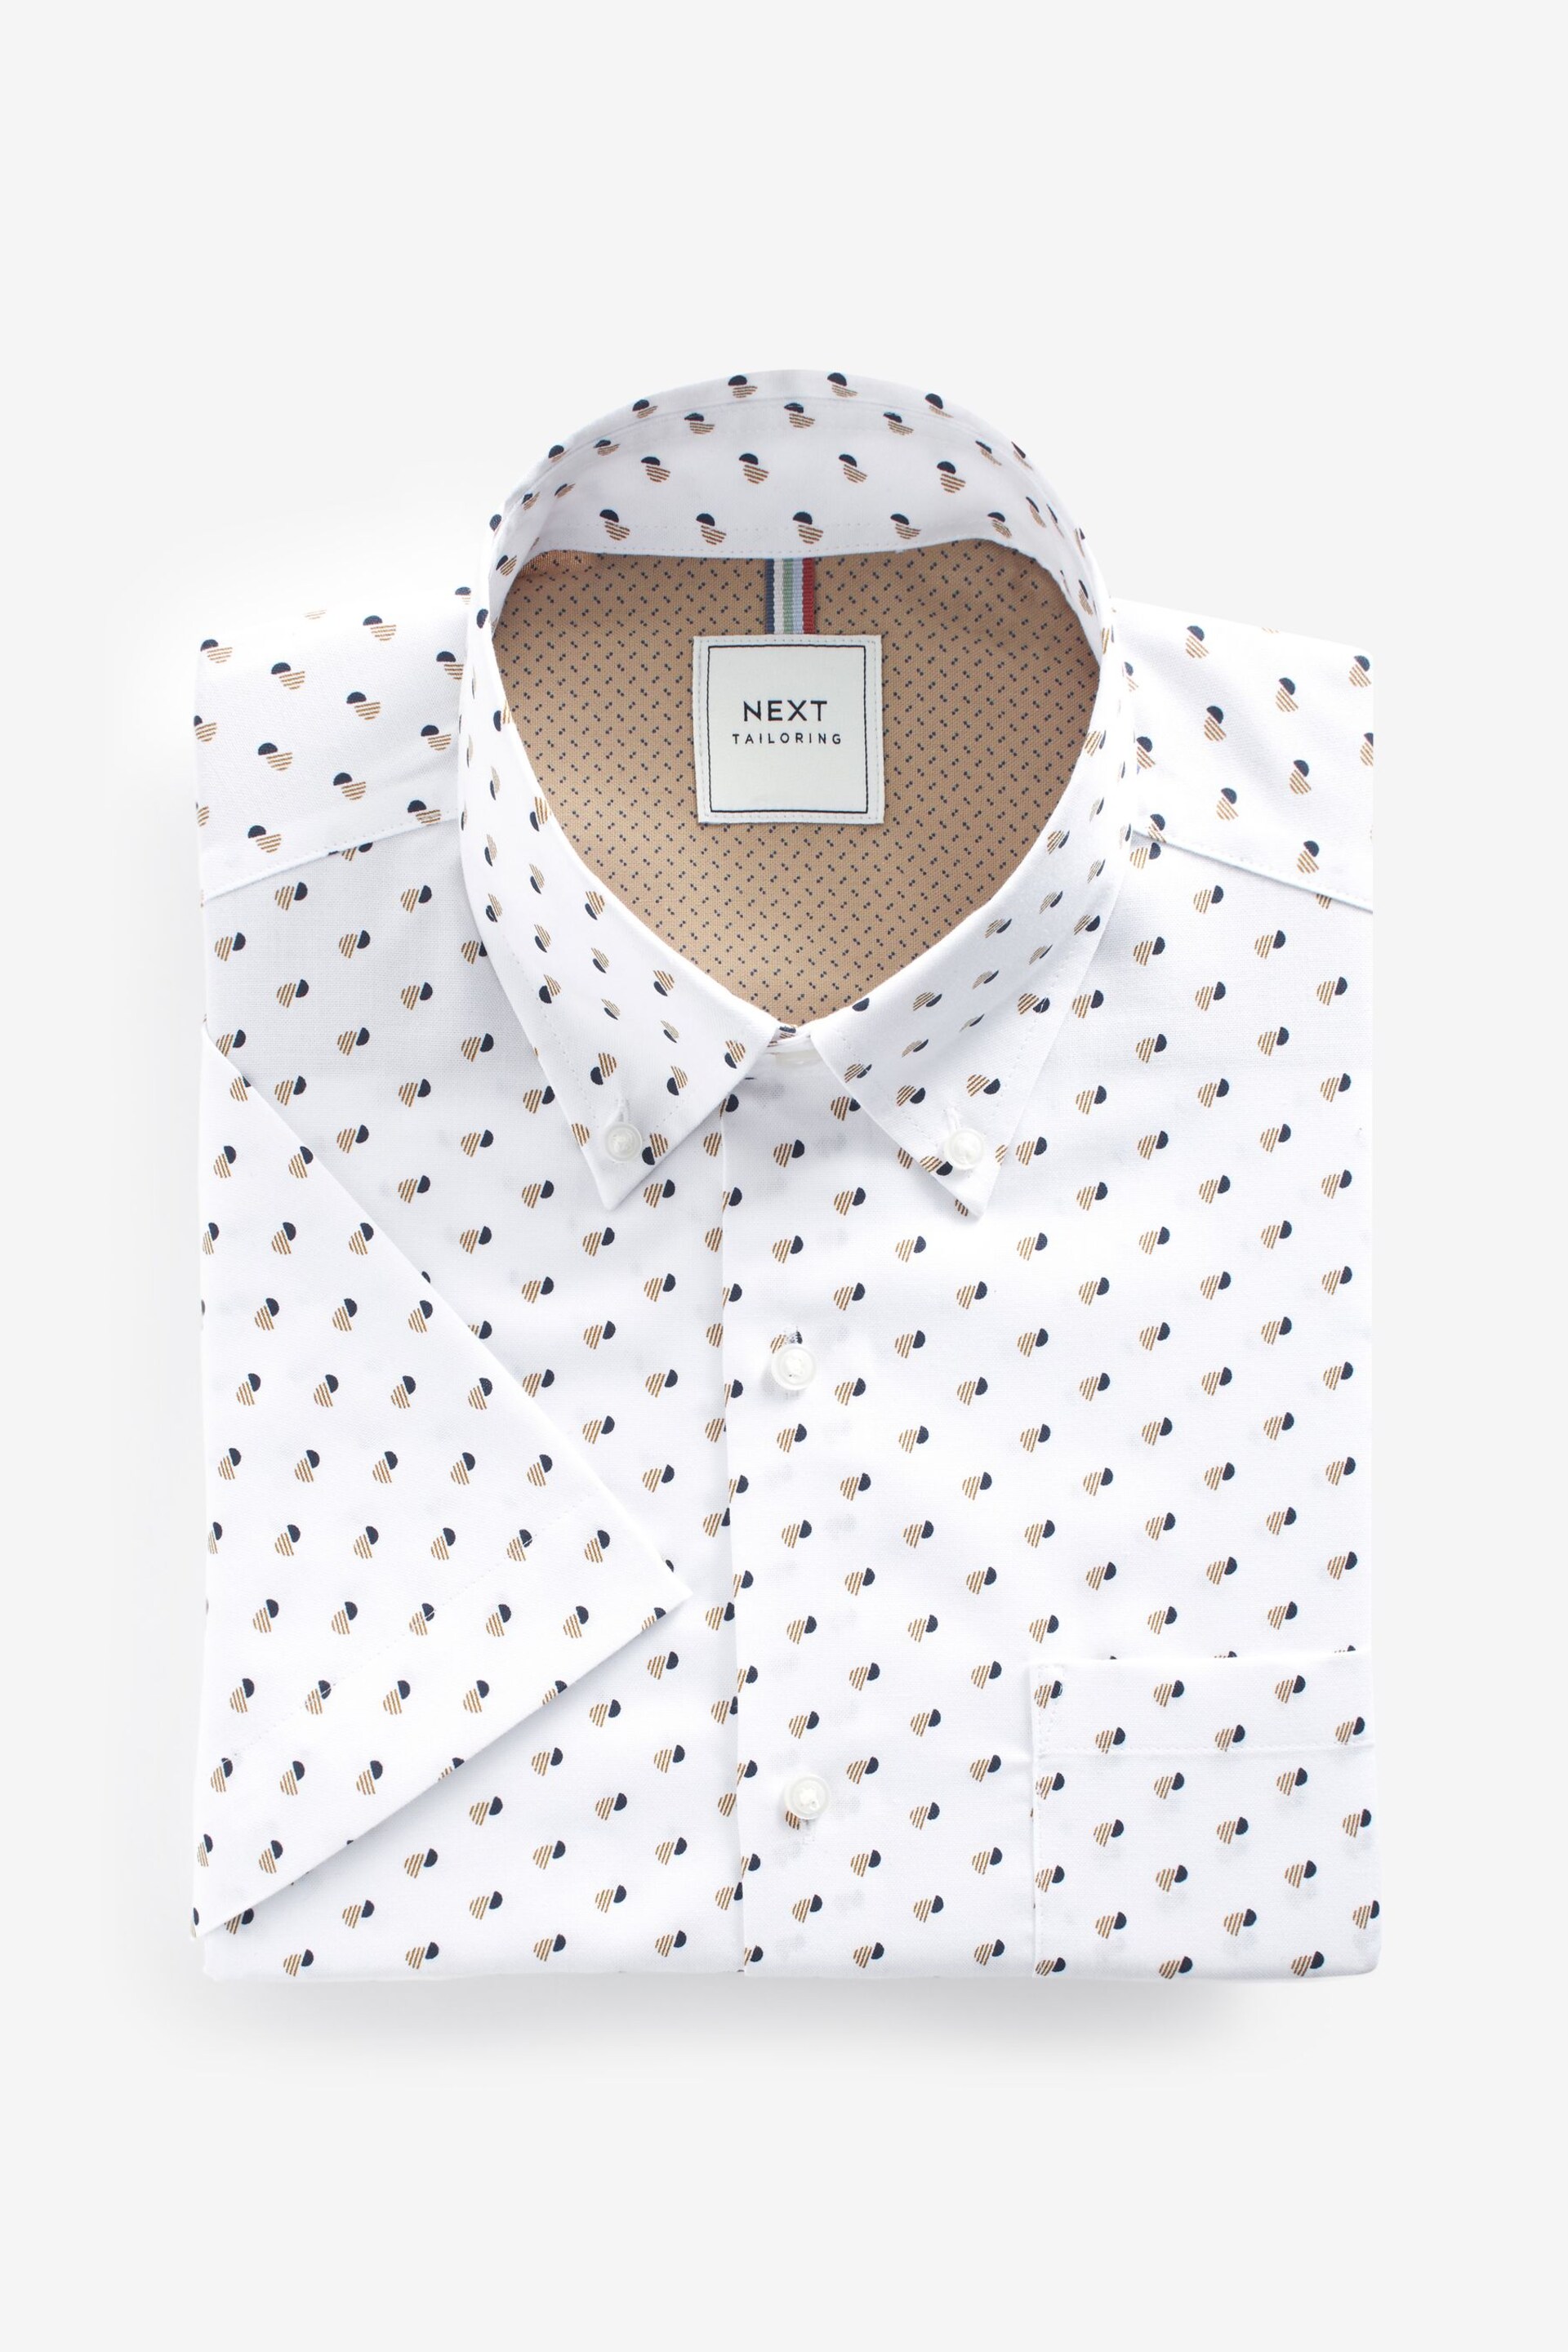 White/Neutral Brown Spot Easy Iron Button Down Short Sleeve Oxford Shirt - Image 5 of 6